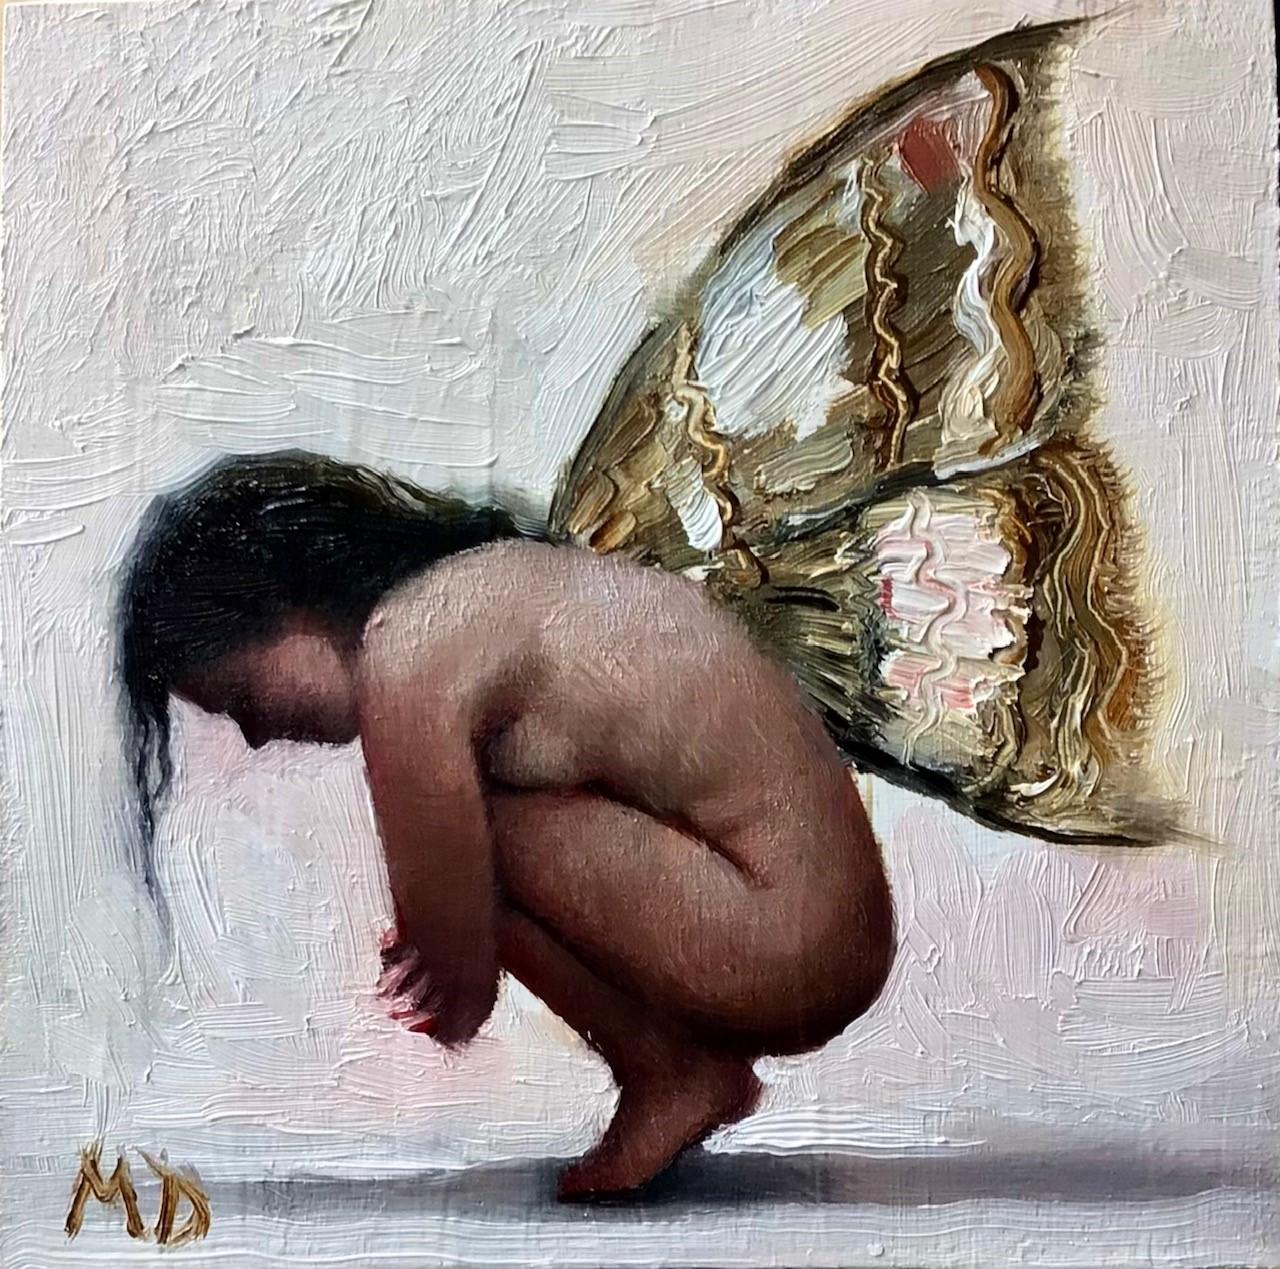 Matteo Di Ventra Animal Painting - "Curled Fairy" Oil Painting